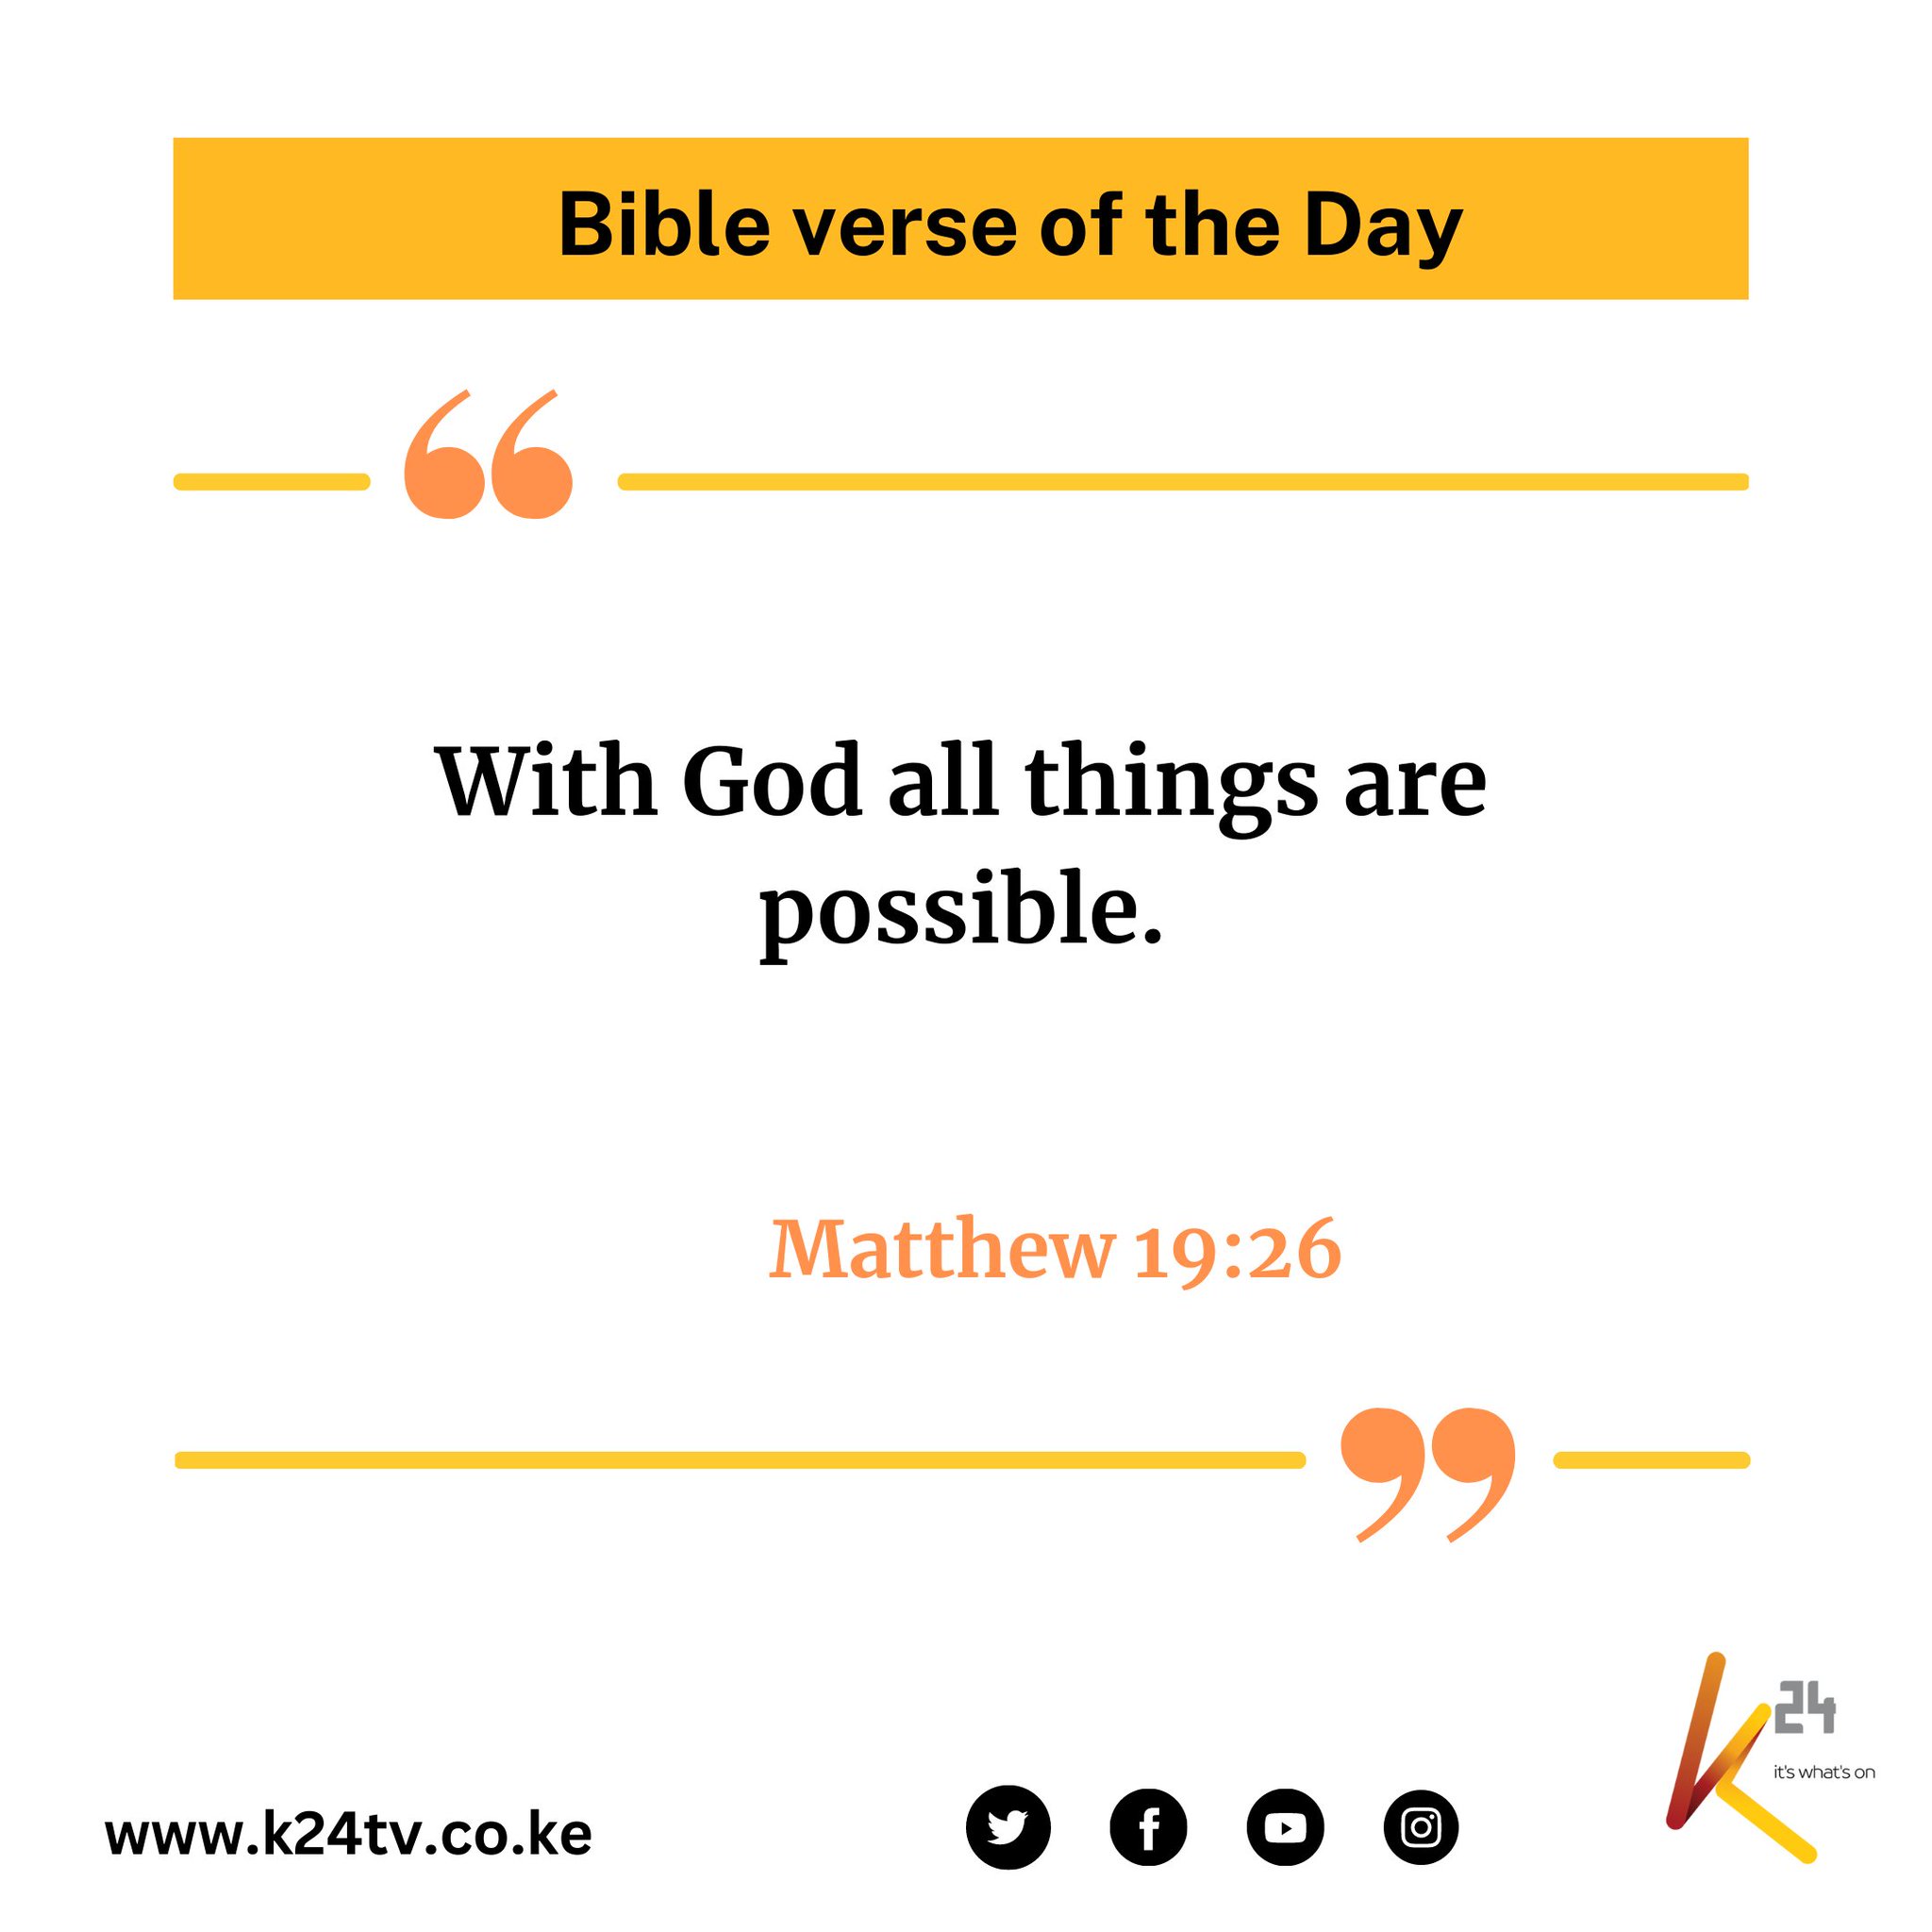 Bible verse of the 66 With God all things are possible Matthew 19.26 24 Lceno WWW.k24tv.co.ke Day